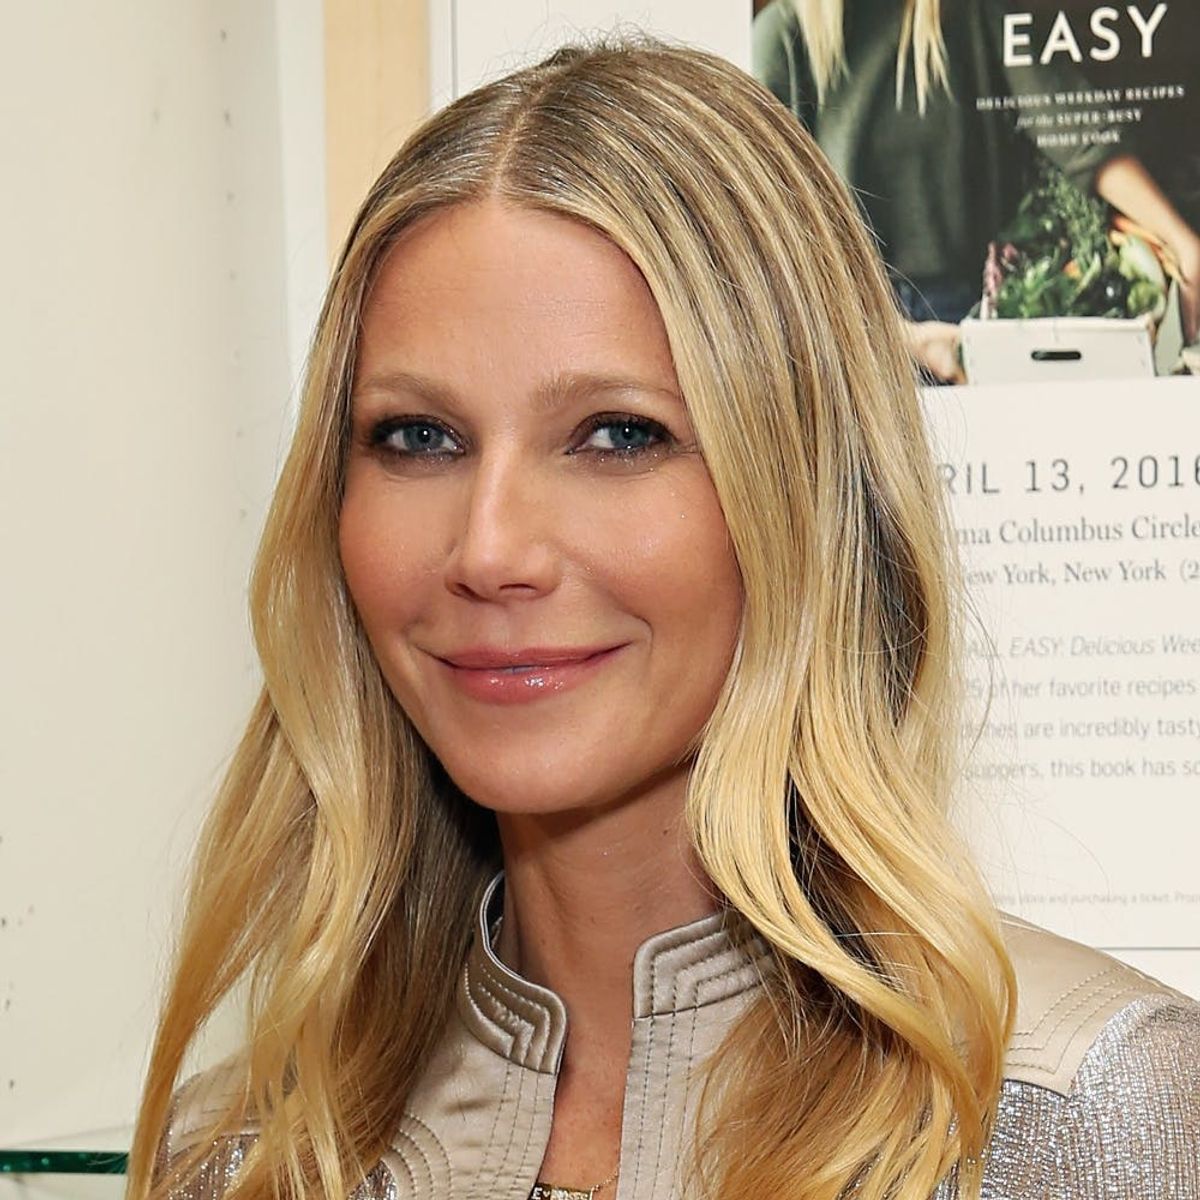 Gwyneth Paltrow Plans to “Separate” Herself from Goop